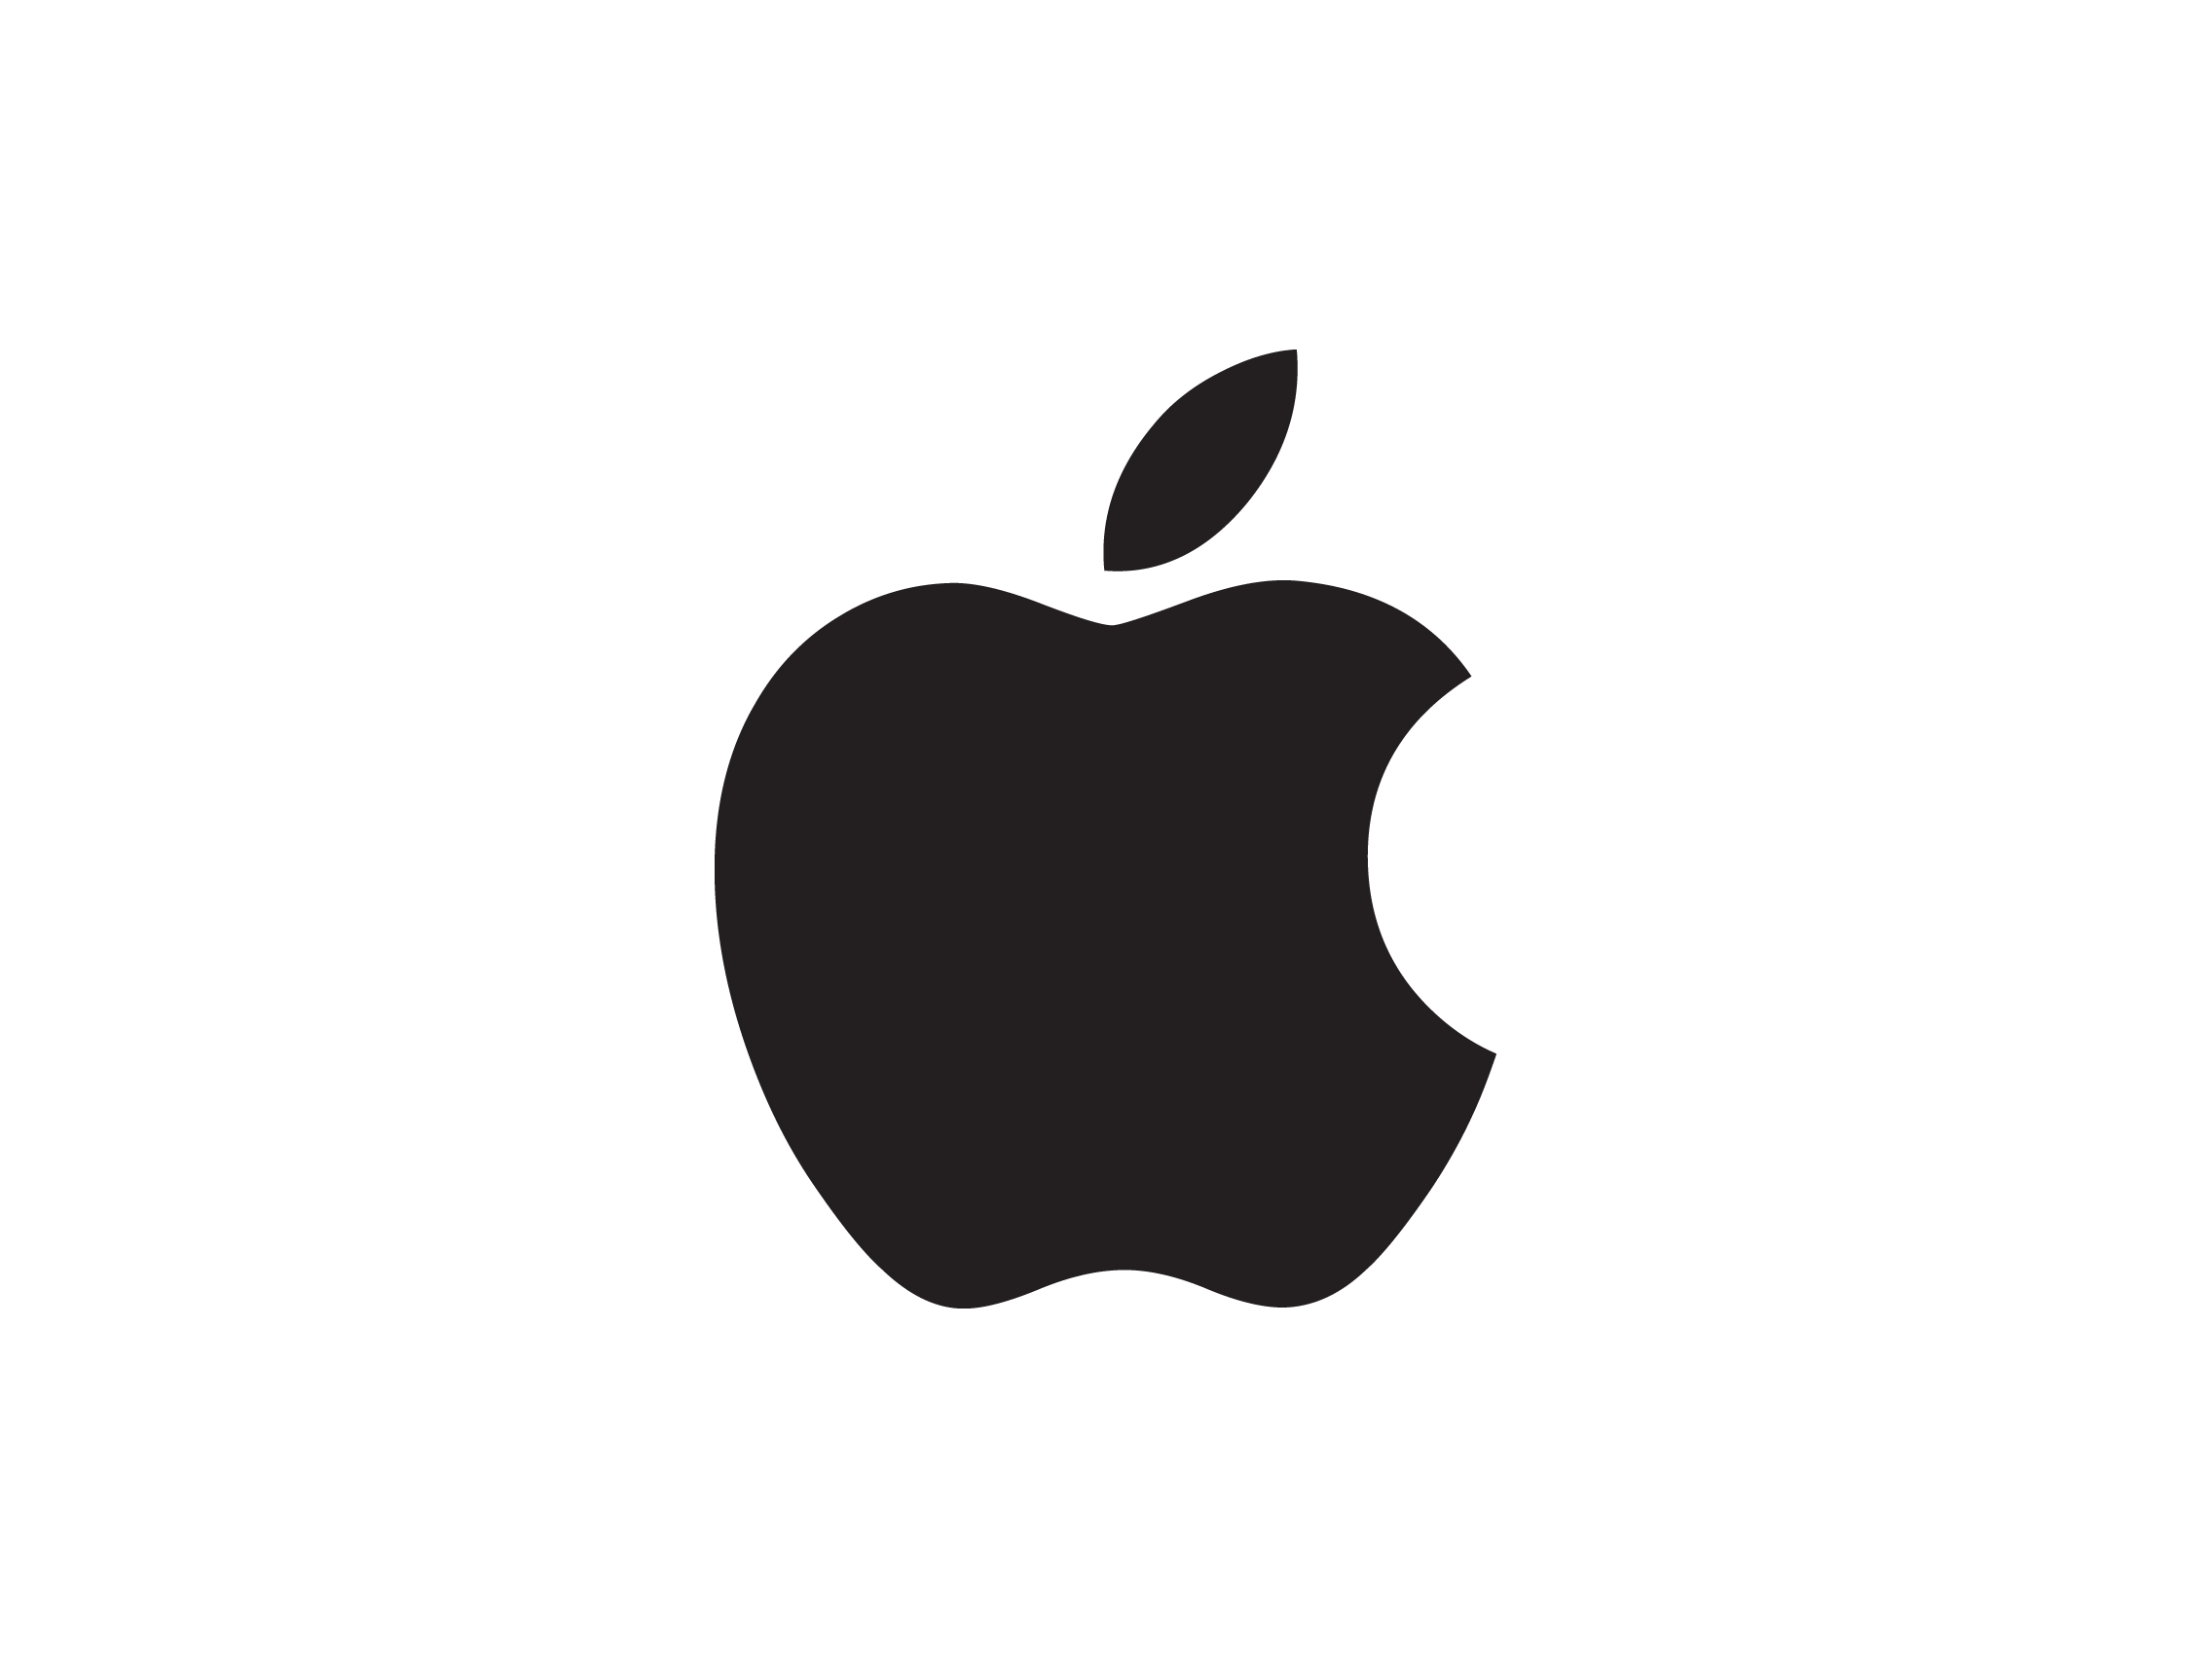 Ipad Apple Technical Support Applecare Plus Iphone PNG Image